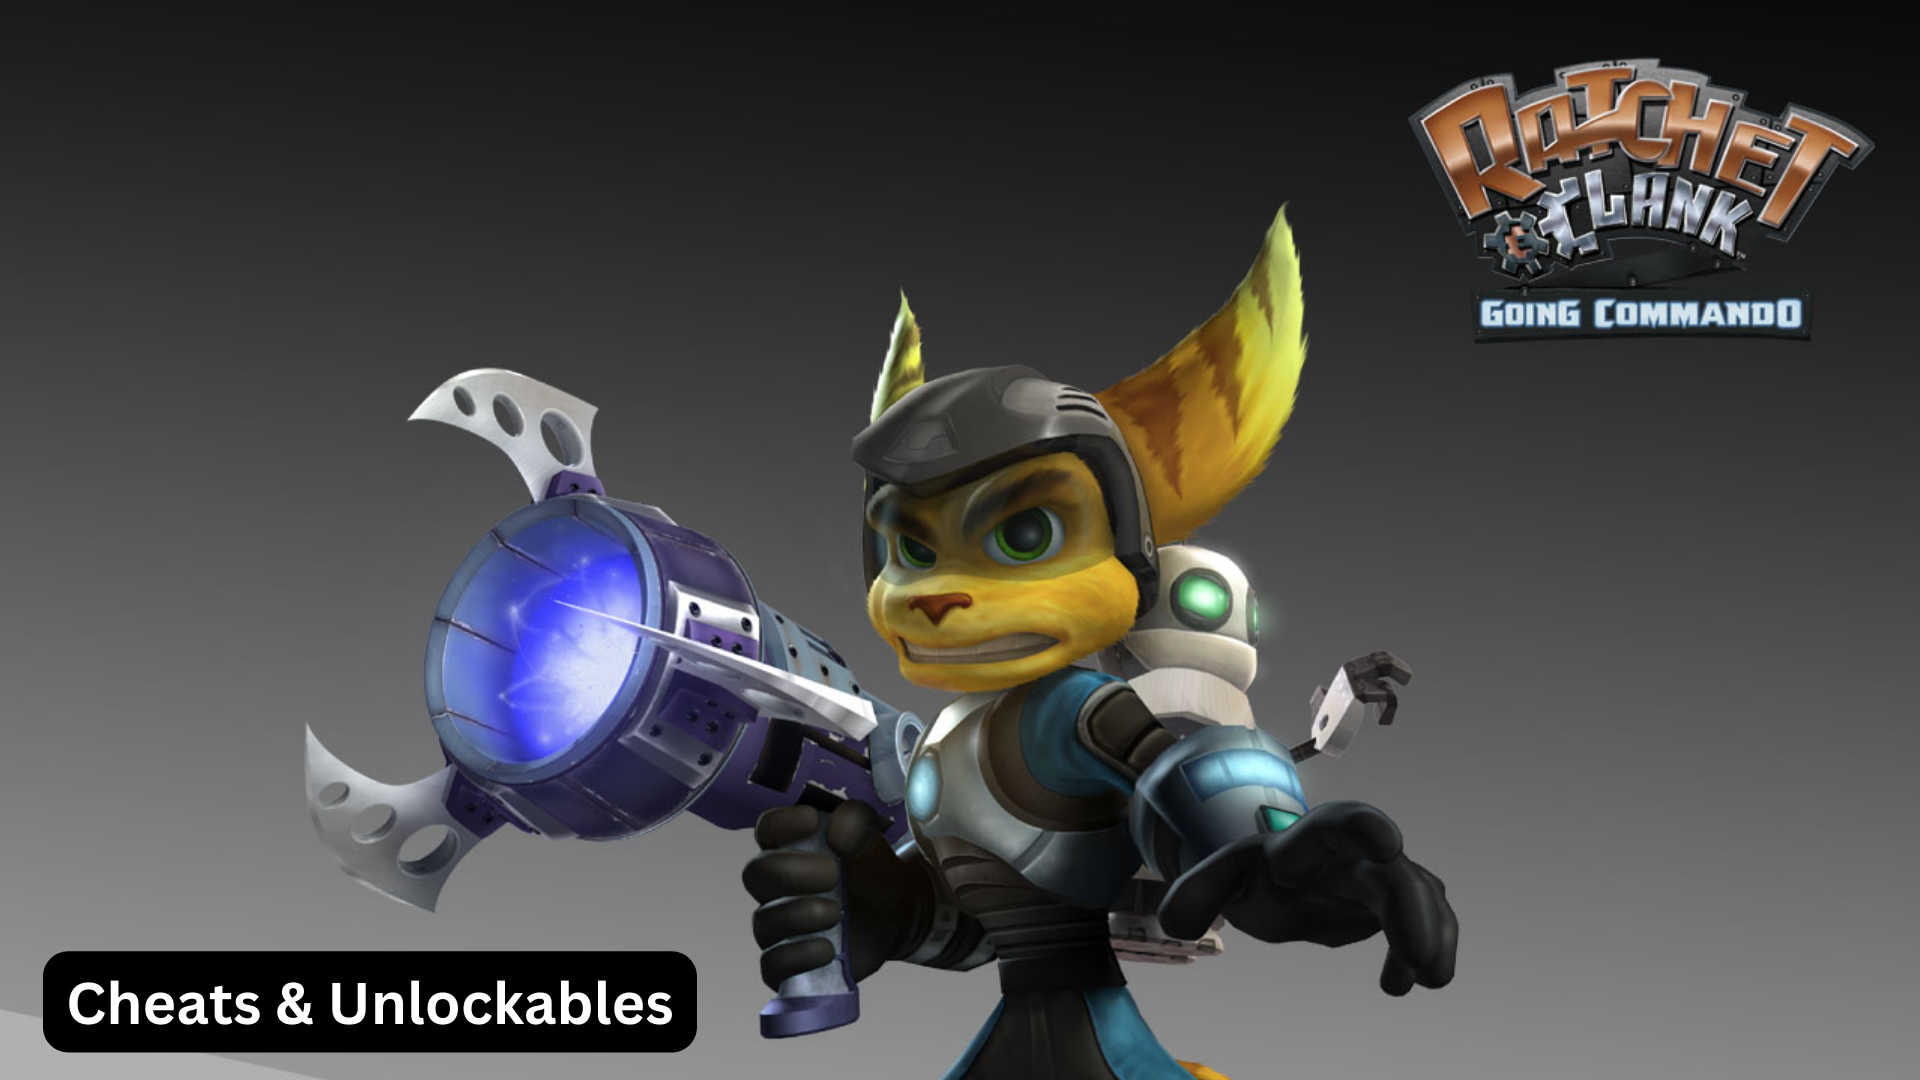 Ratchet And Clank Going Commando Cheats